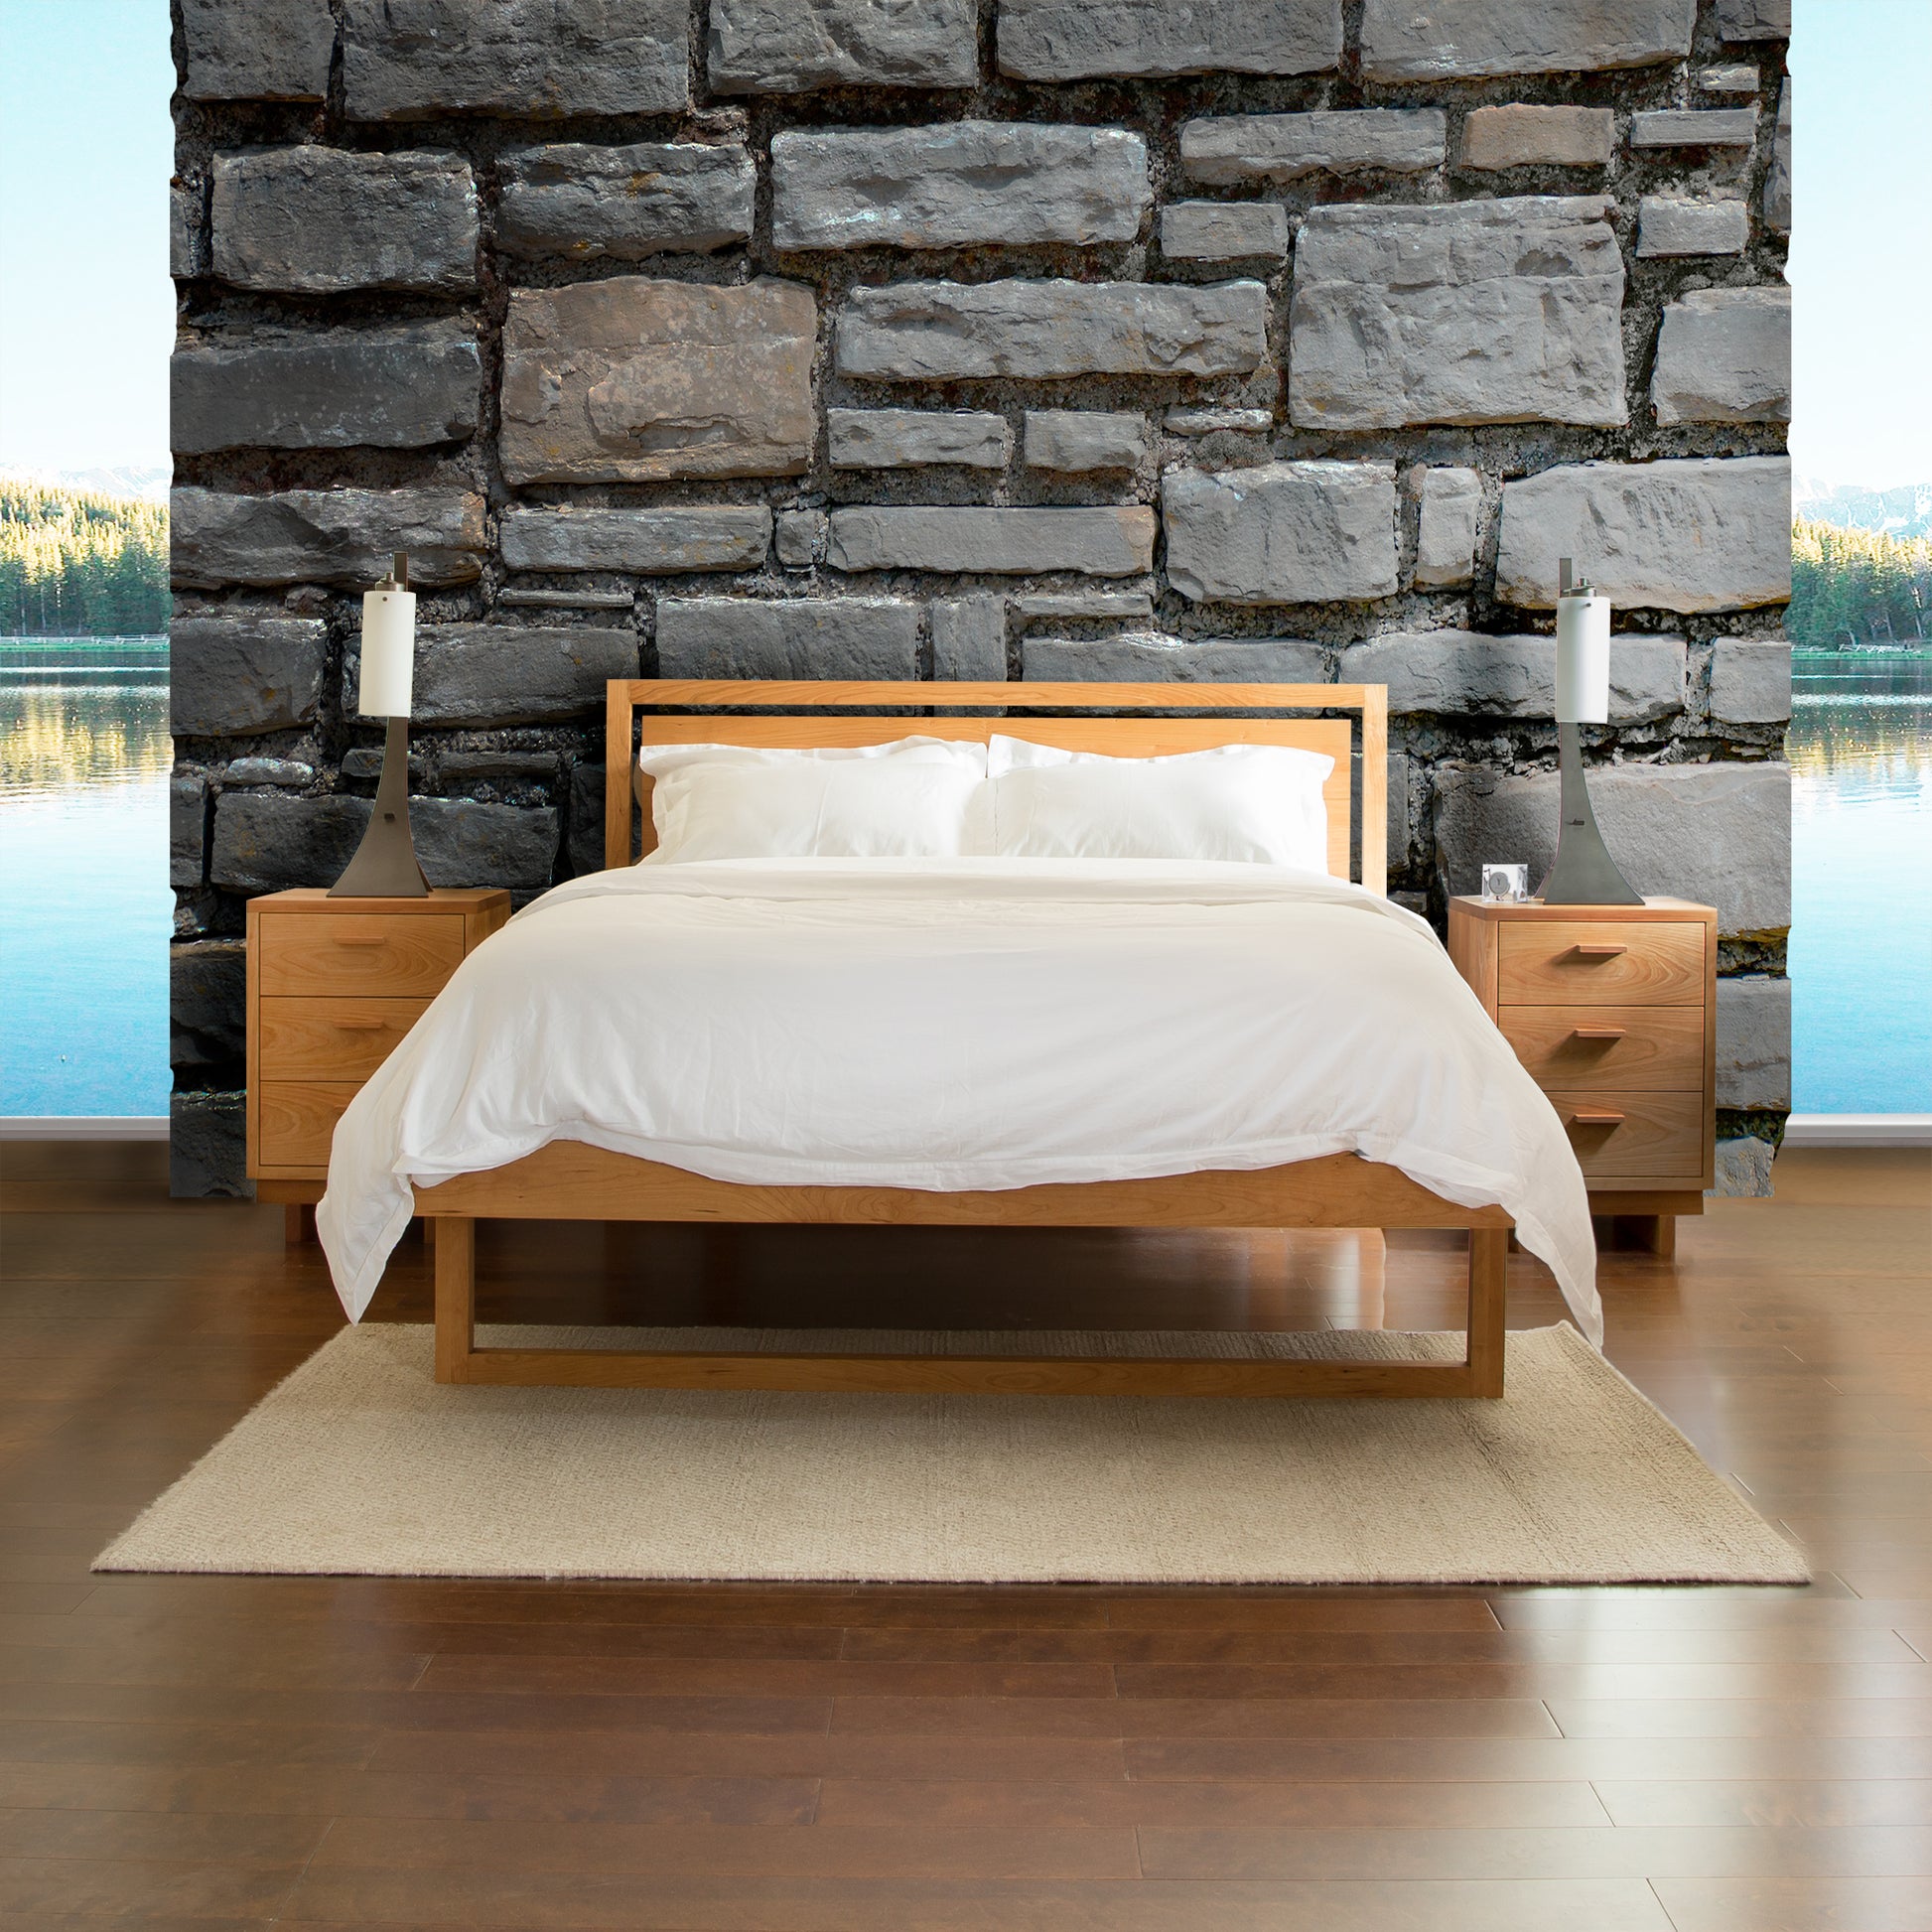 A modern Vermont Furniture Designs Pendant Bed made from sustainably harvested cherry wood with white bedding in front of a stone wall, overlooking a serene lake through a large window.